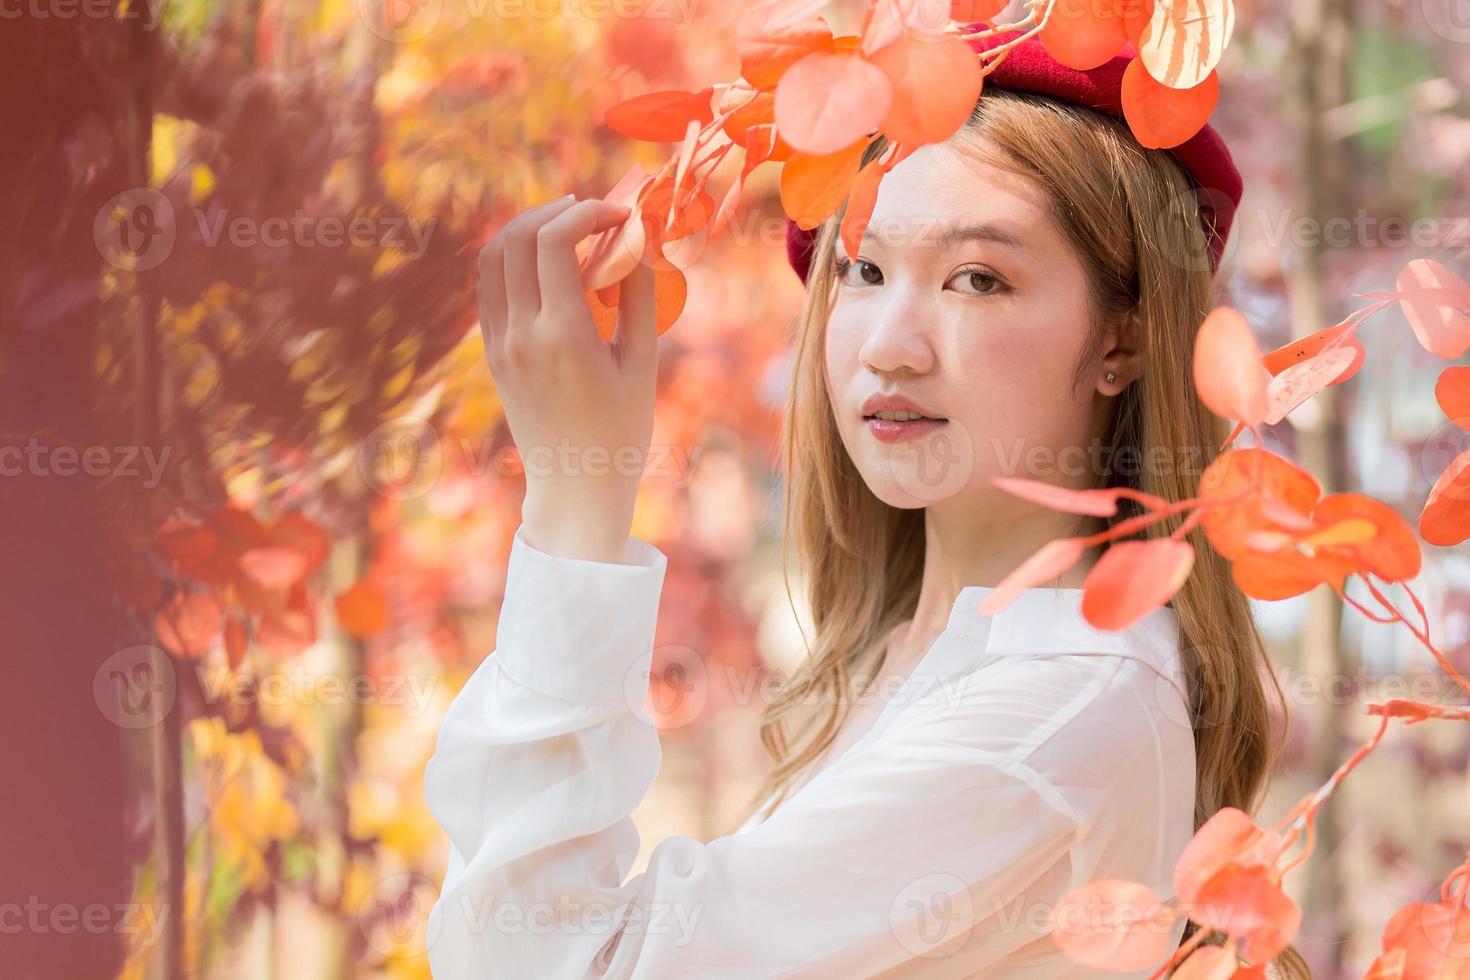 Asian woman who wears white shirt and red cap stands in red-orange leave as forrest in autumn. photo